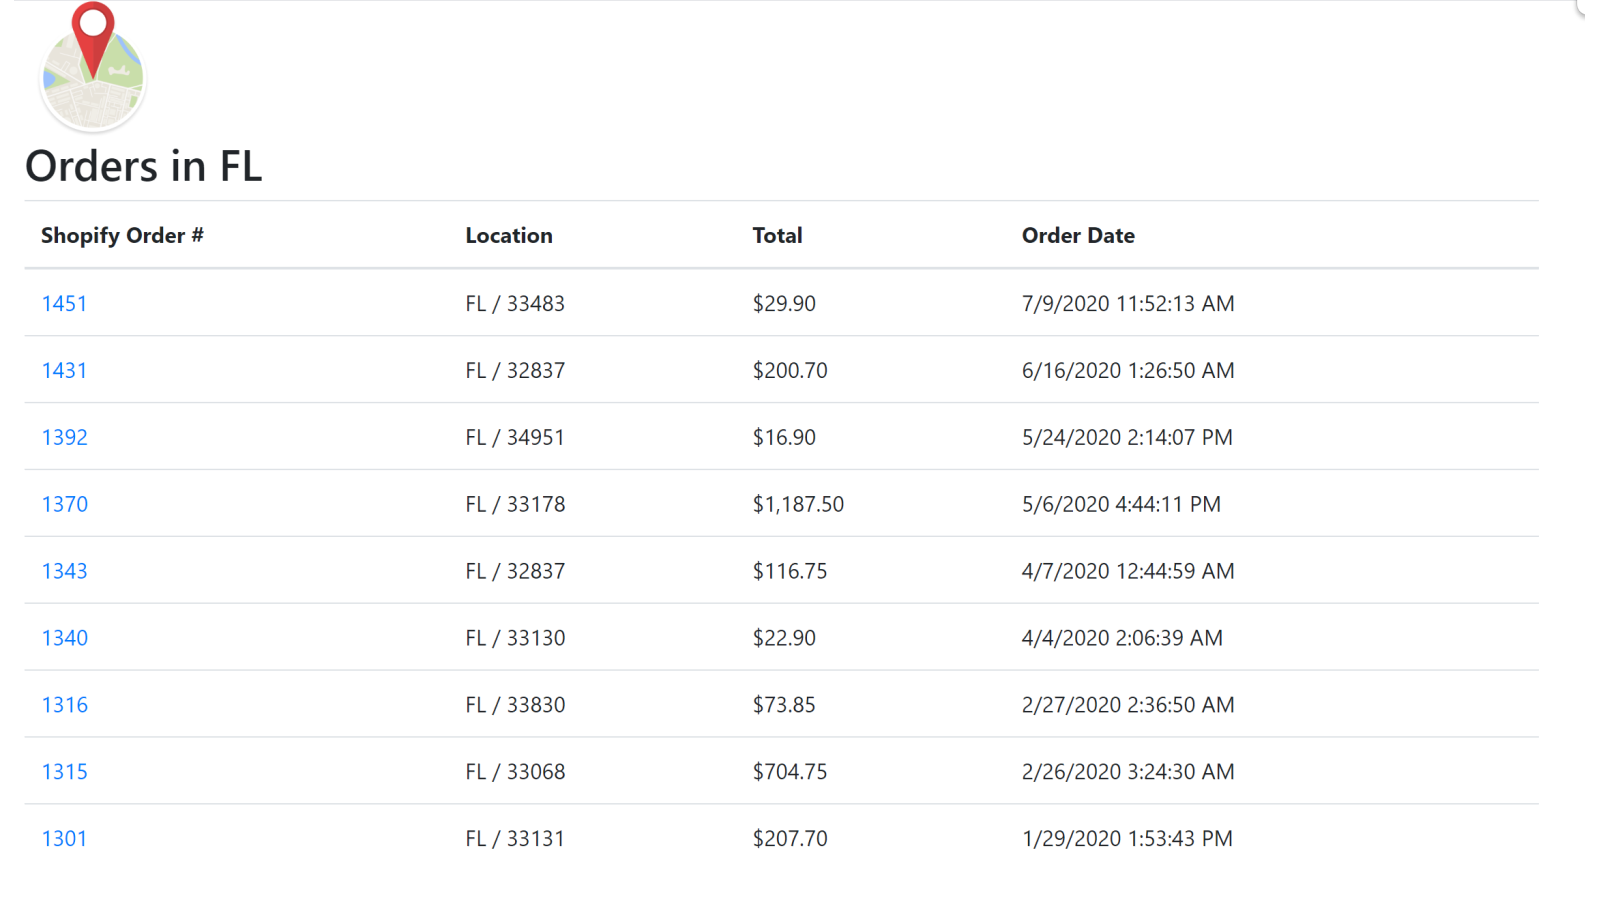 View all orders in an area in the time frame